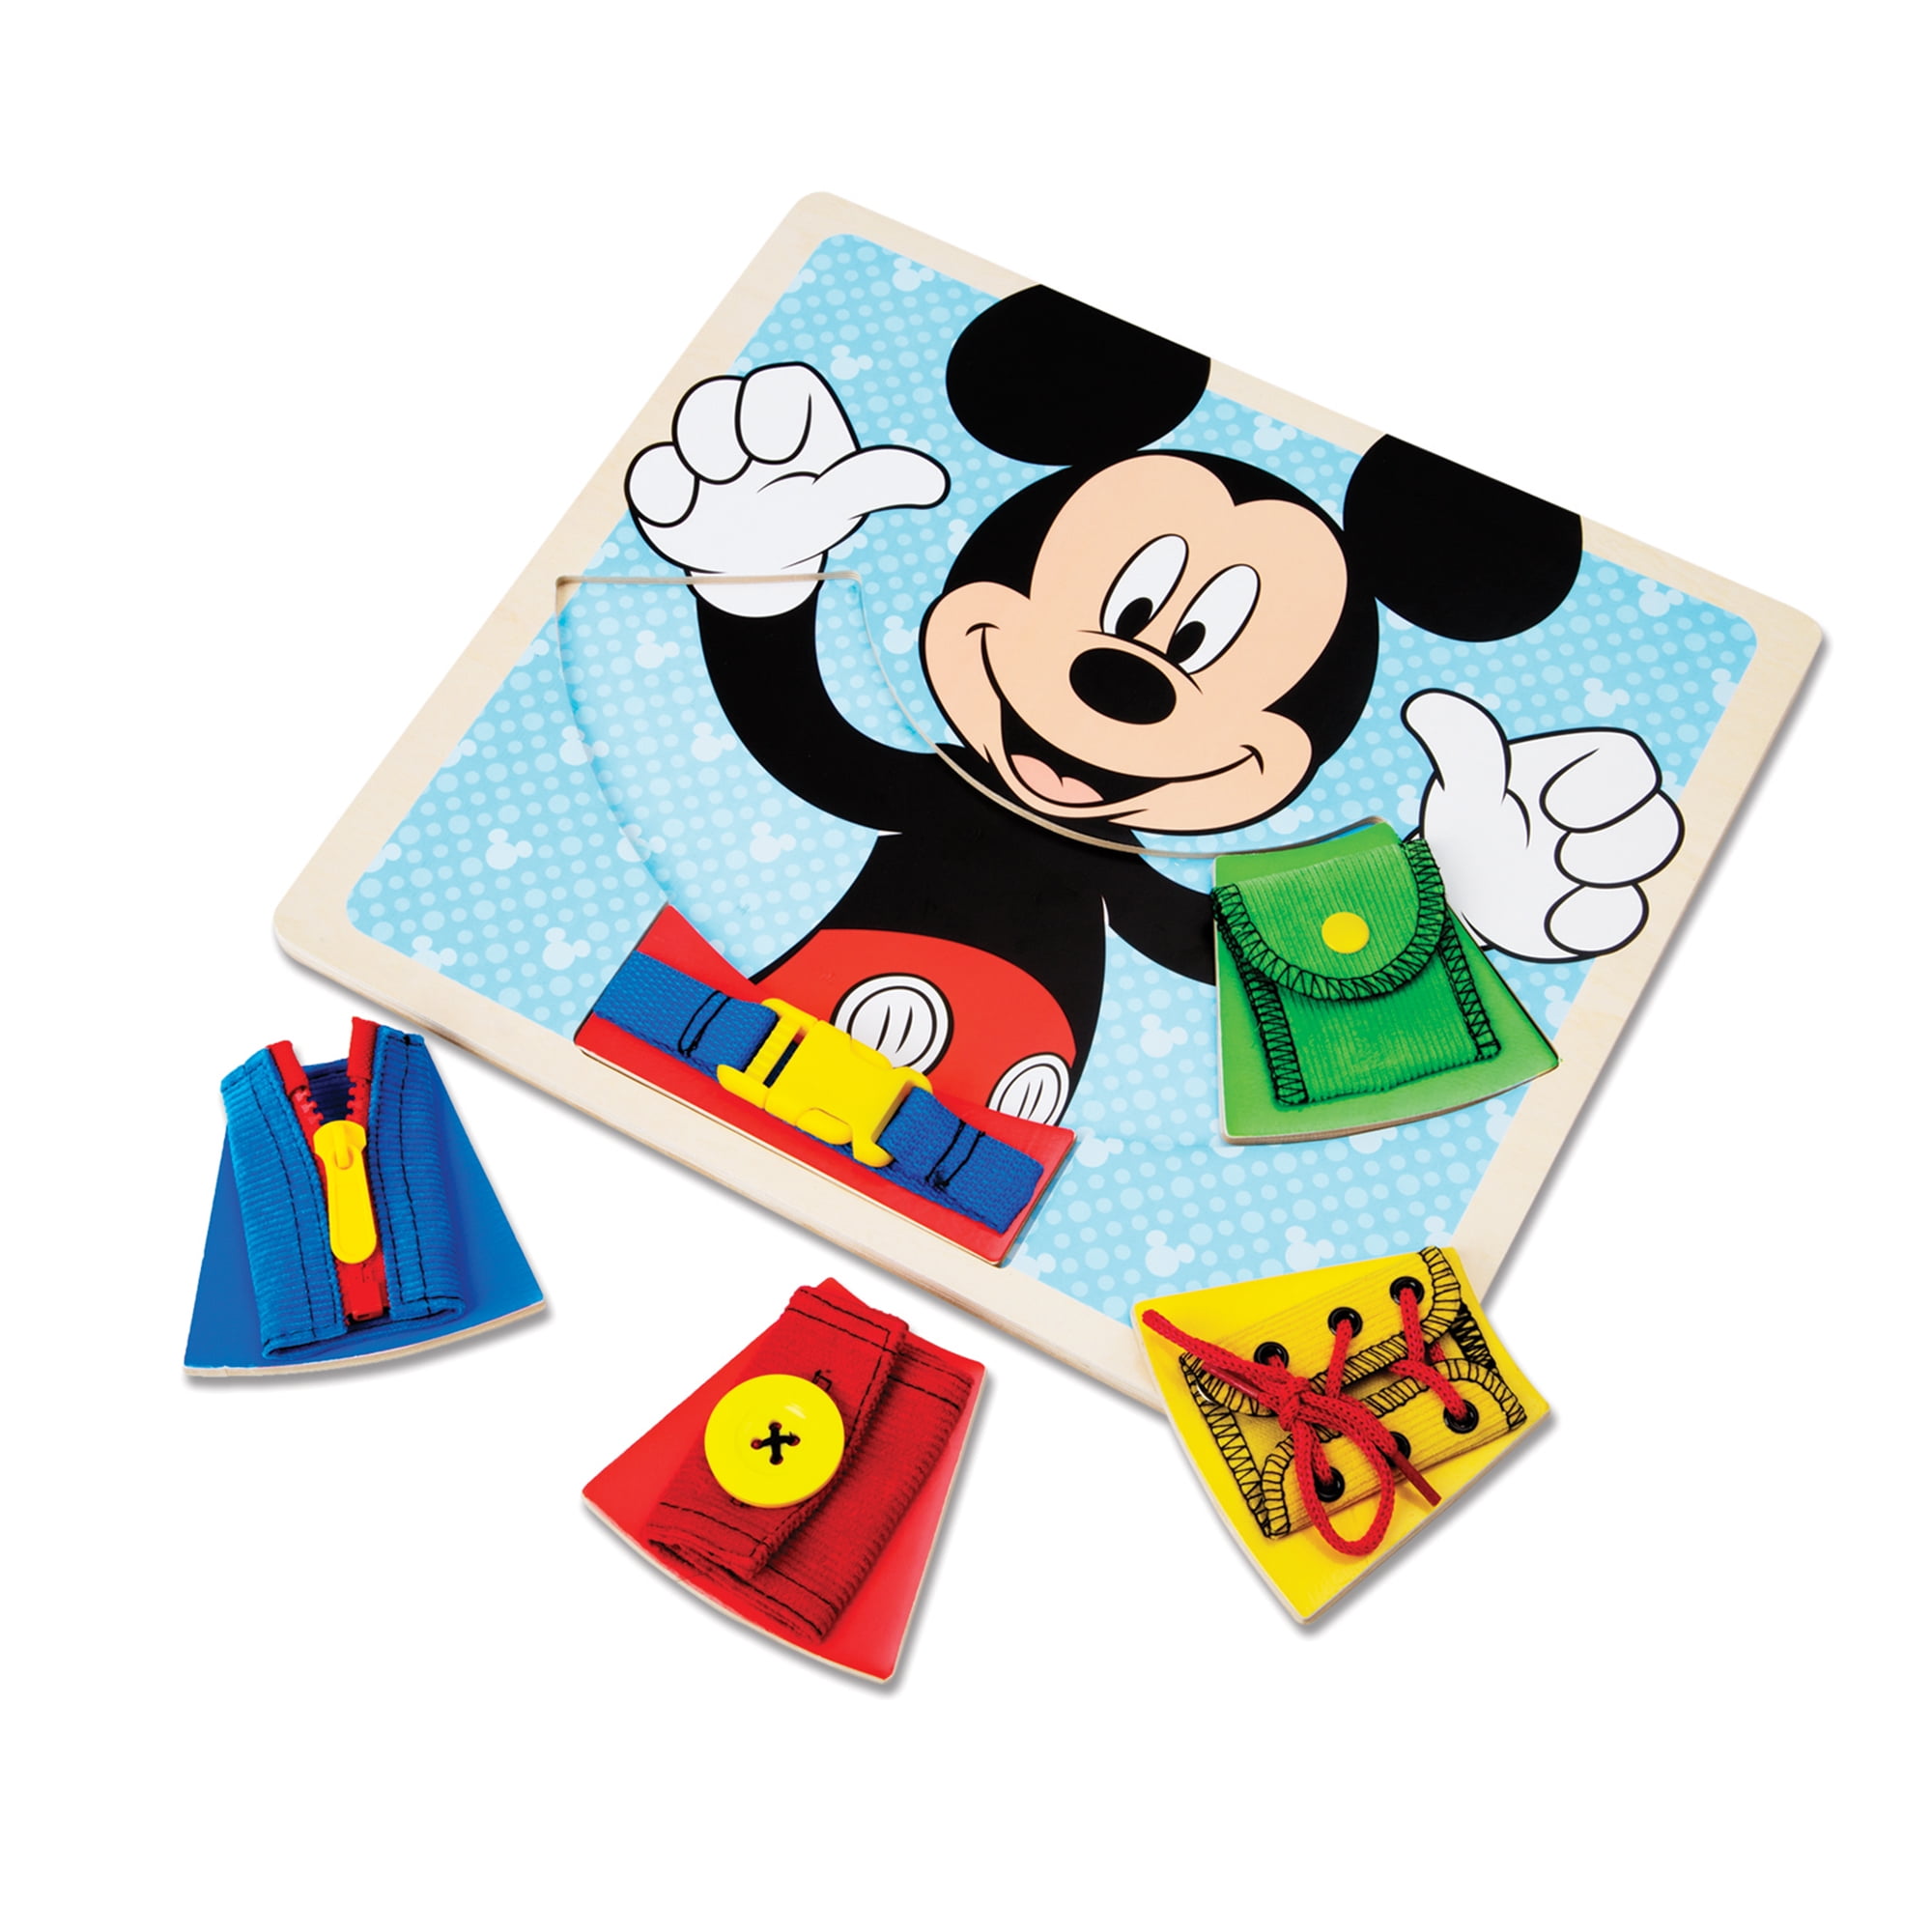 Kids Age 3 Years Melissa & Doug Basic Skills Puzzle Board 6 Removable Pieces 